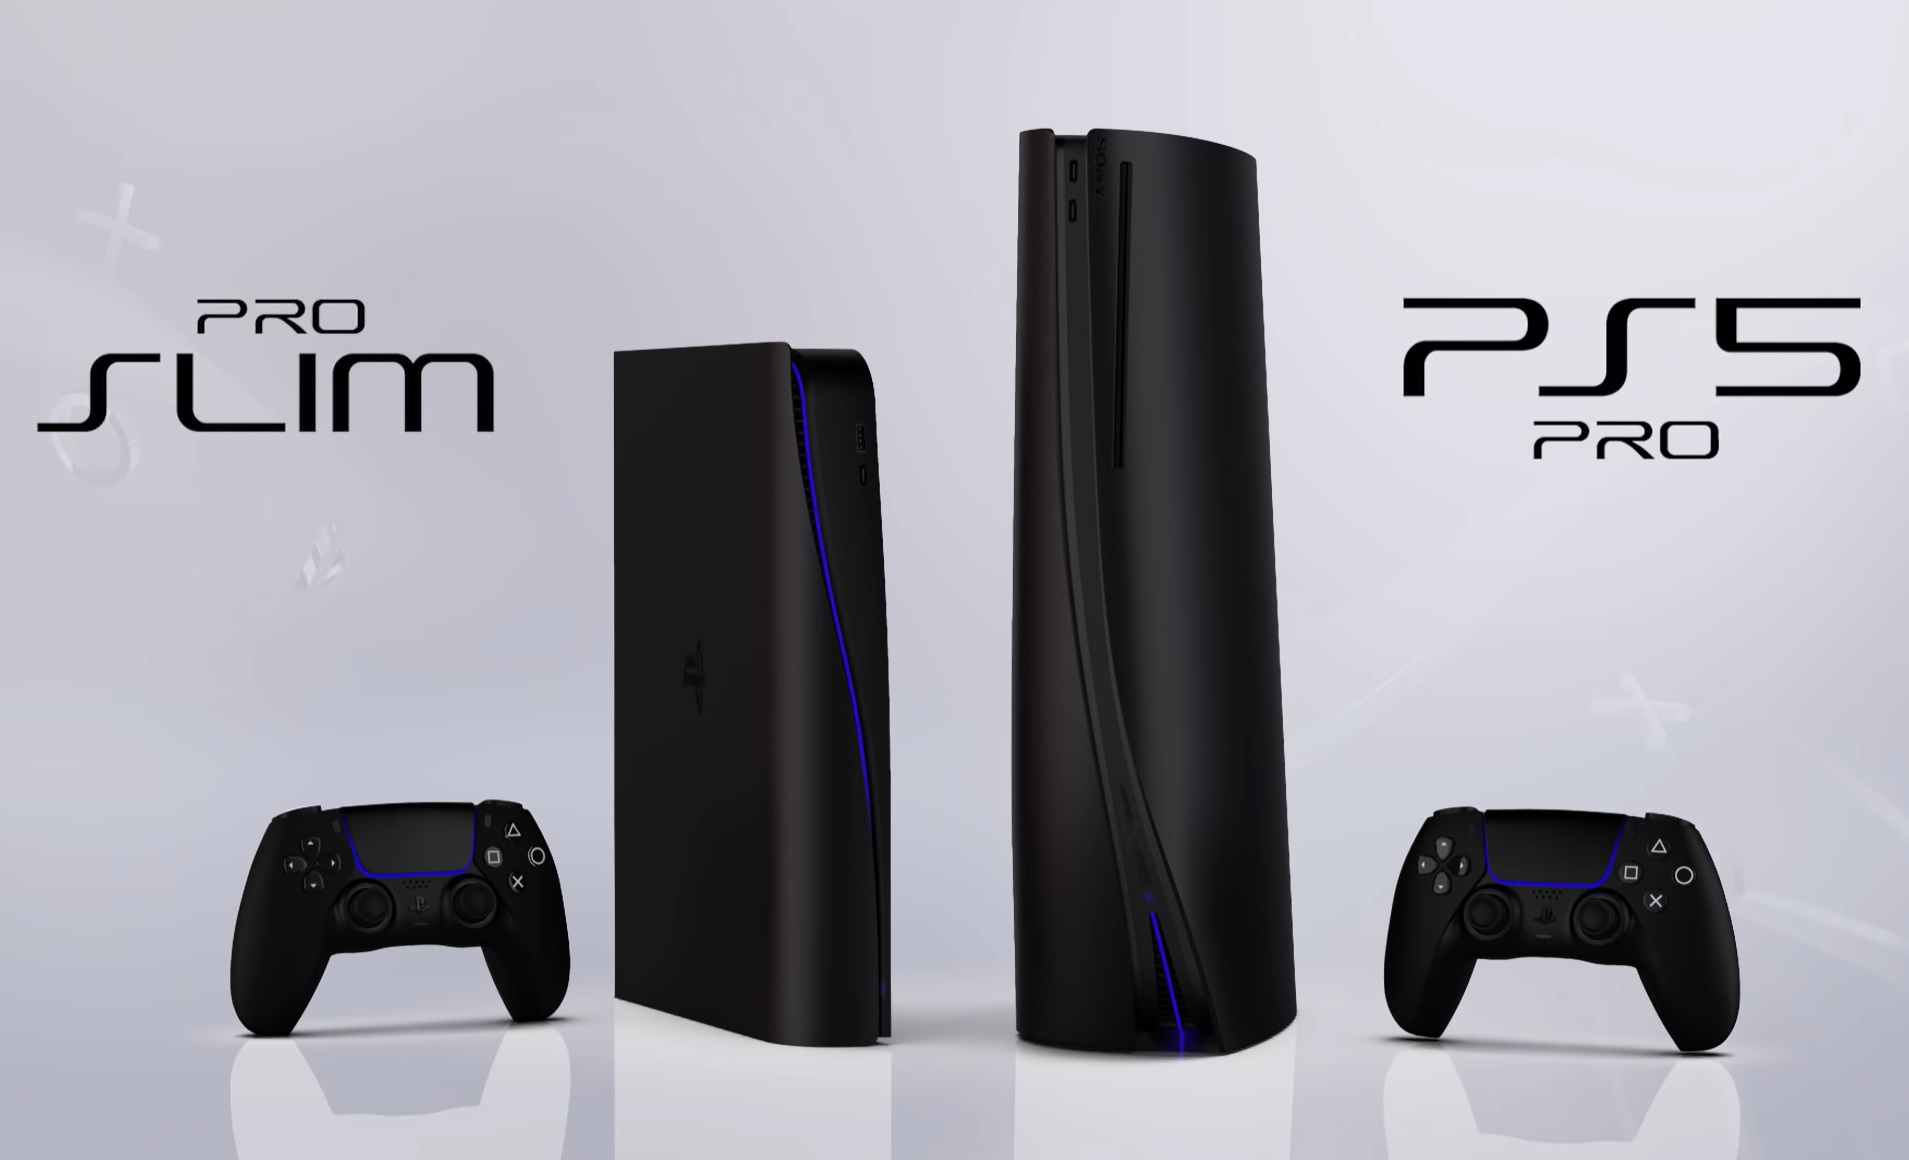 PlayStation 5 Pro to be released in April 20231